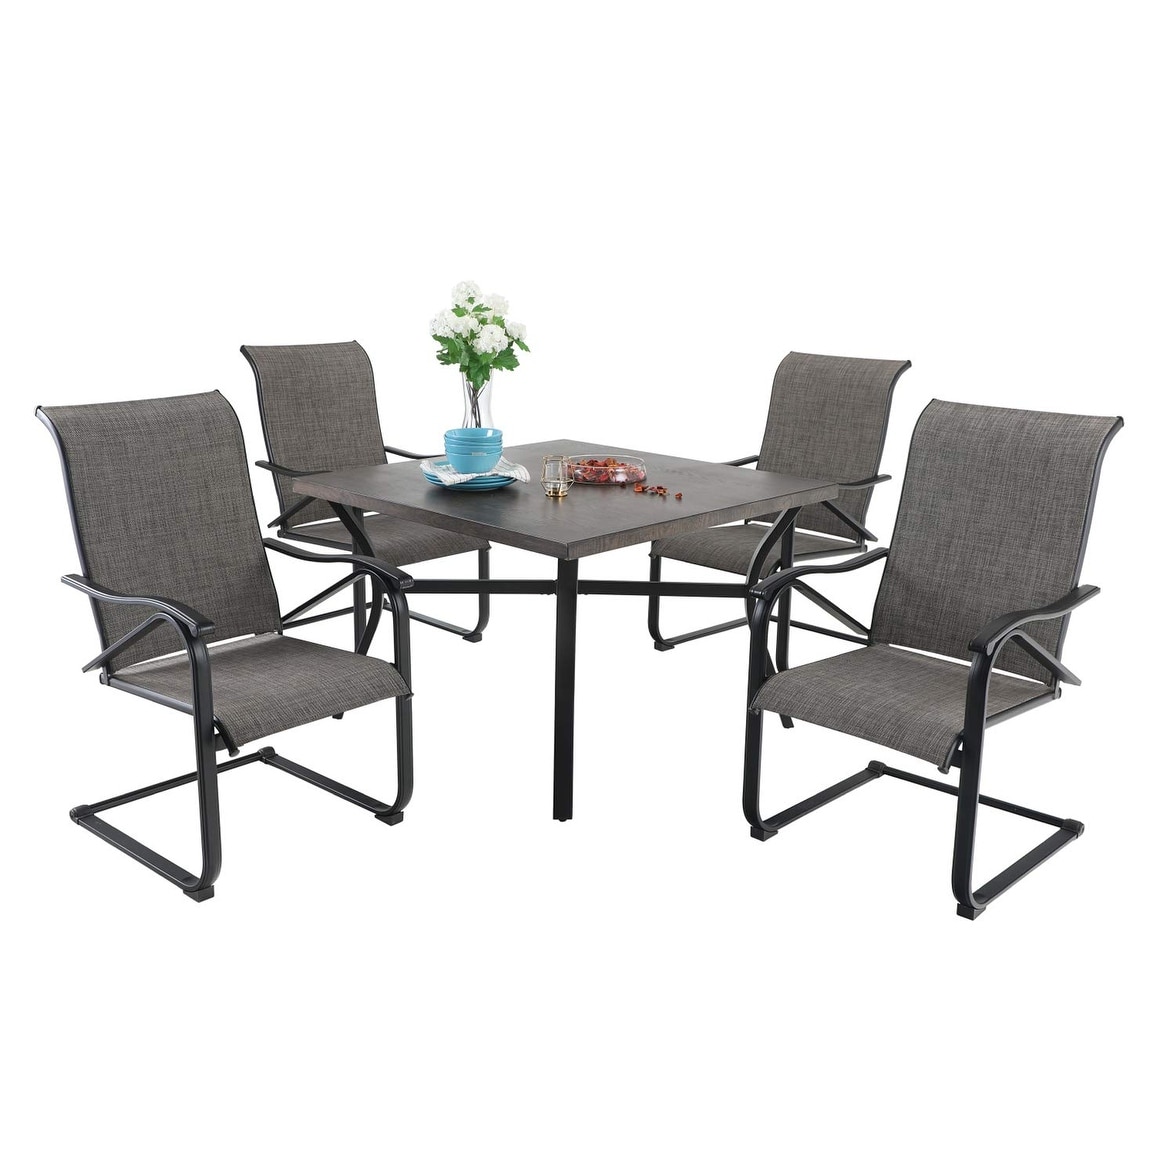 Sophia and William Patio Dining Set 5 Pieces  4 C Spring Motion Chairs And 1 Sqare Metal Table With Umbrella Hole